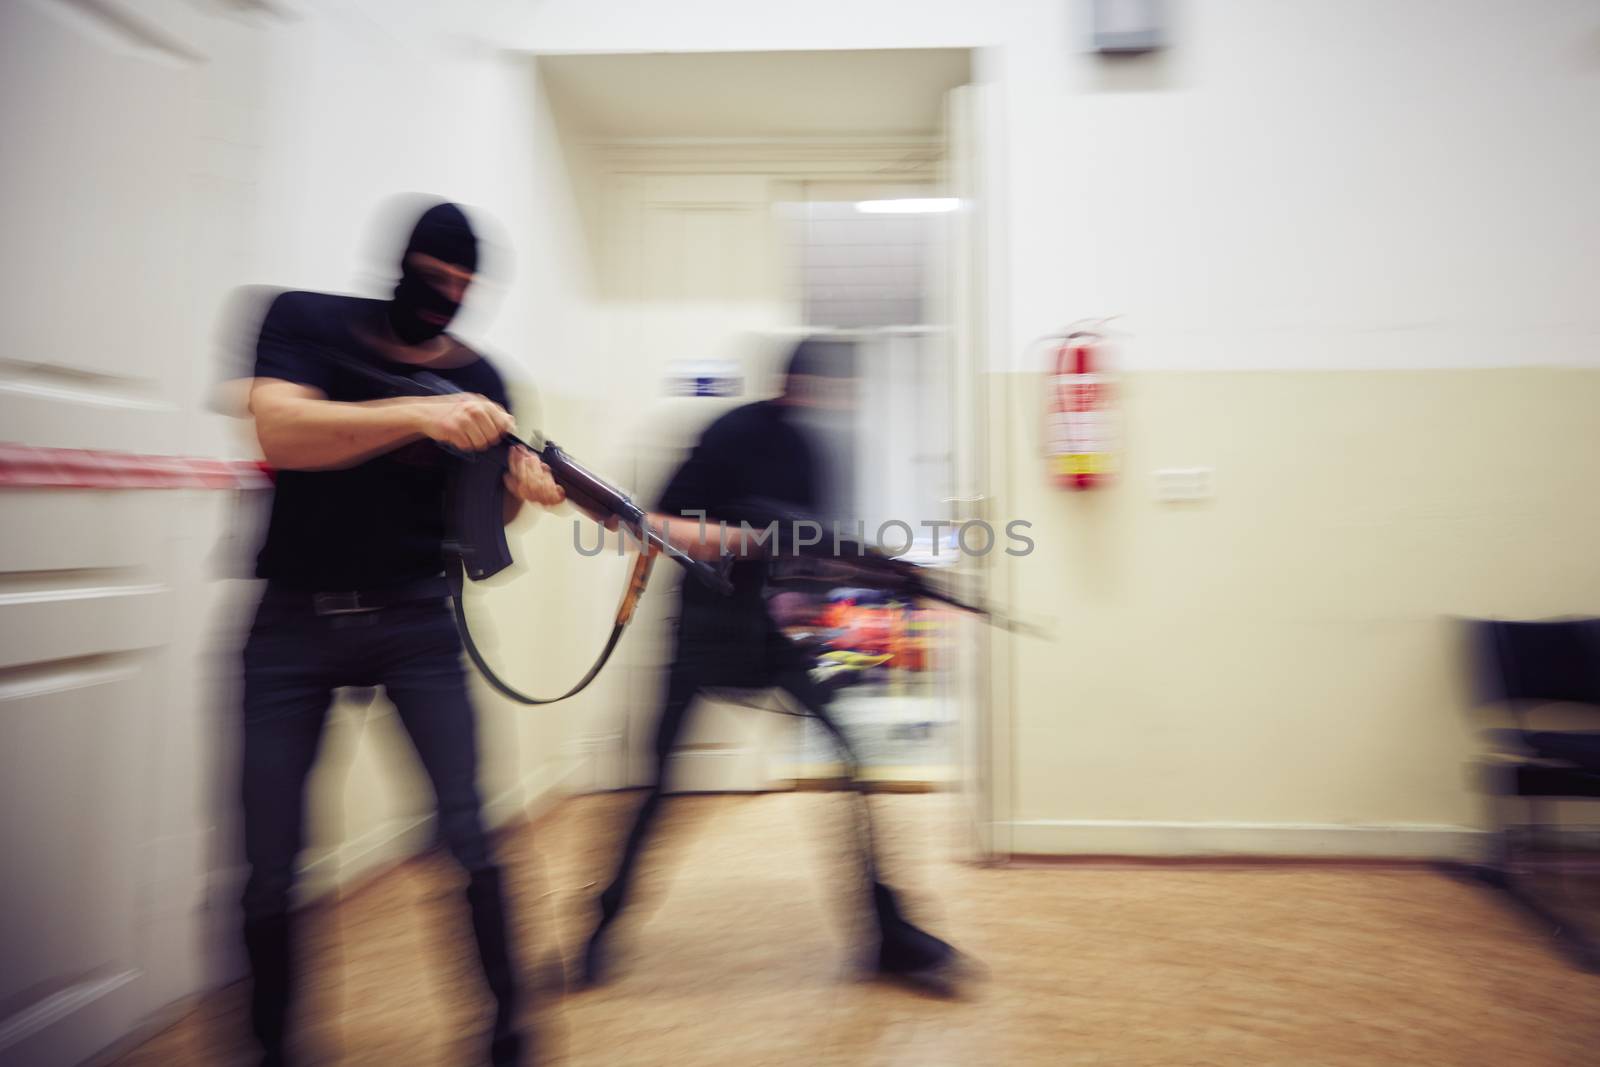 Two terrorists with rifles in the building - defocused